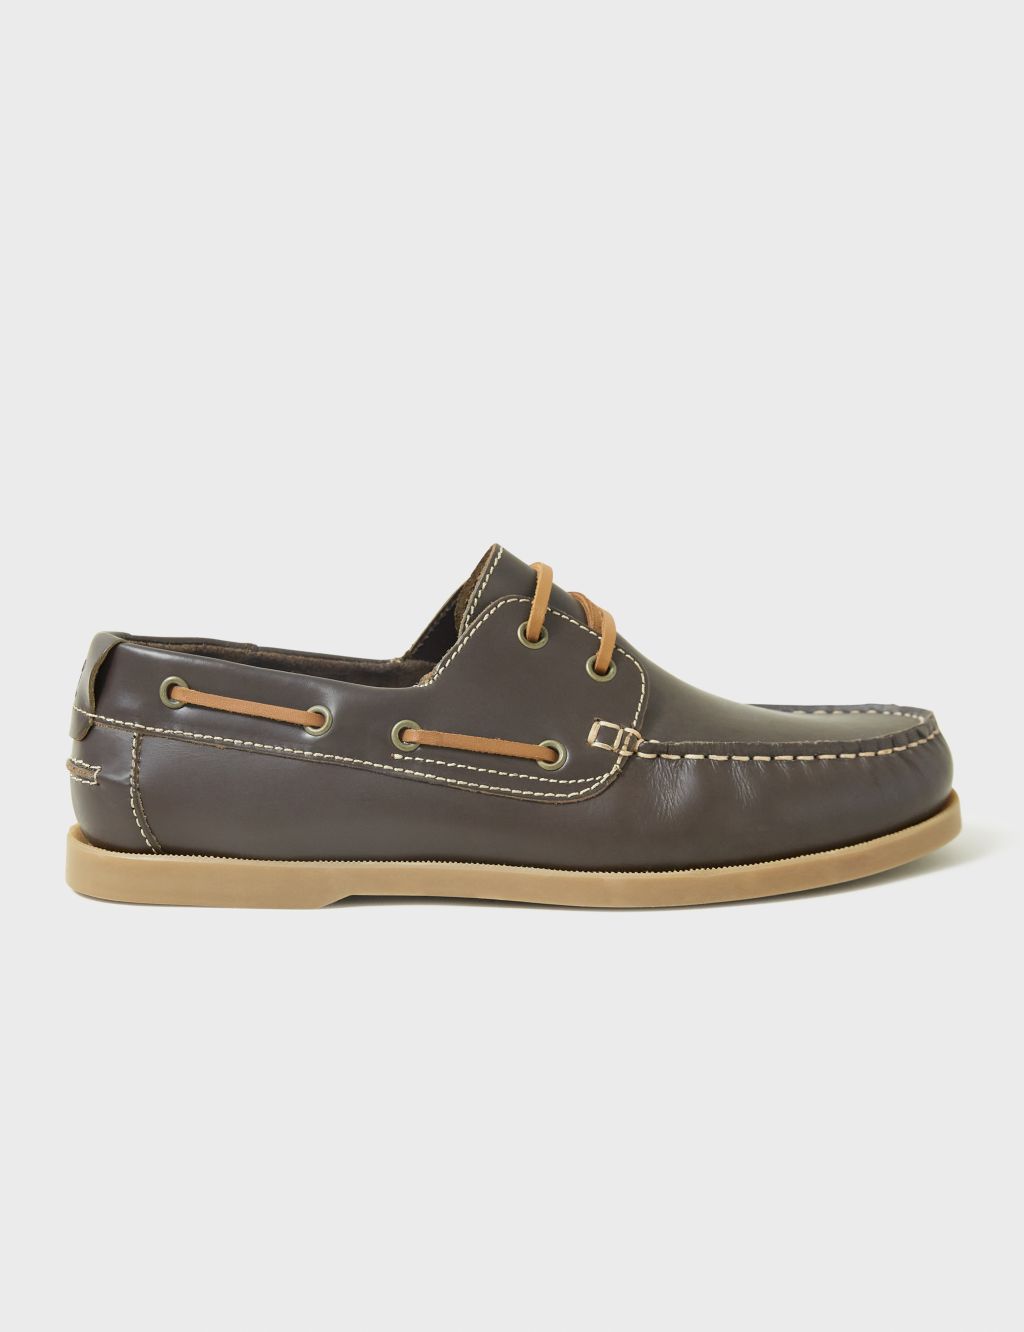 Leather Boat Shoes image 2